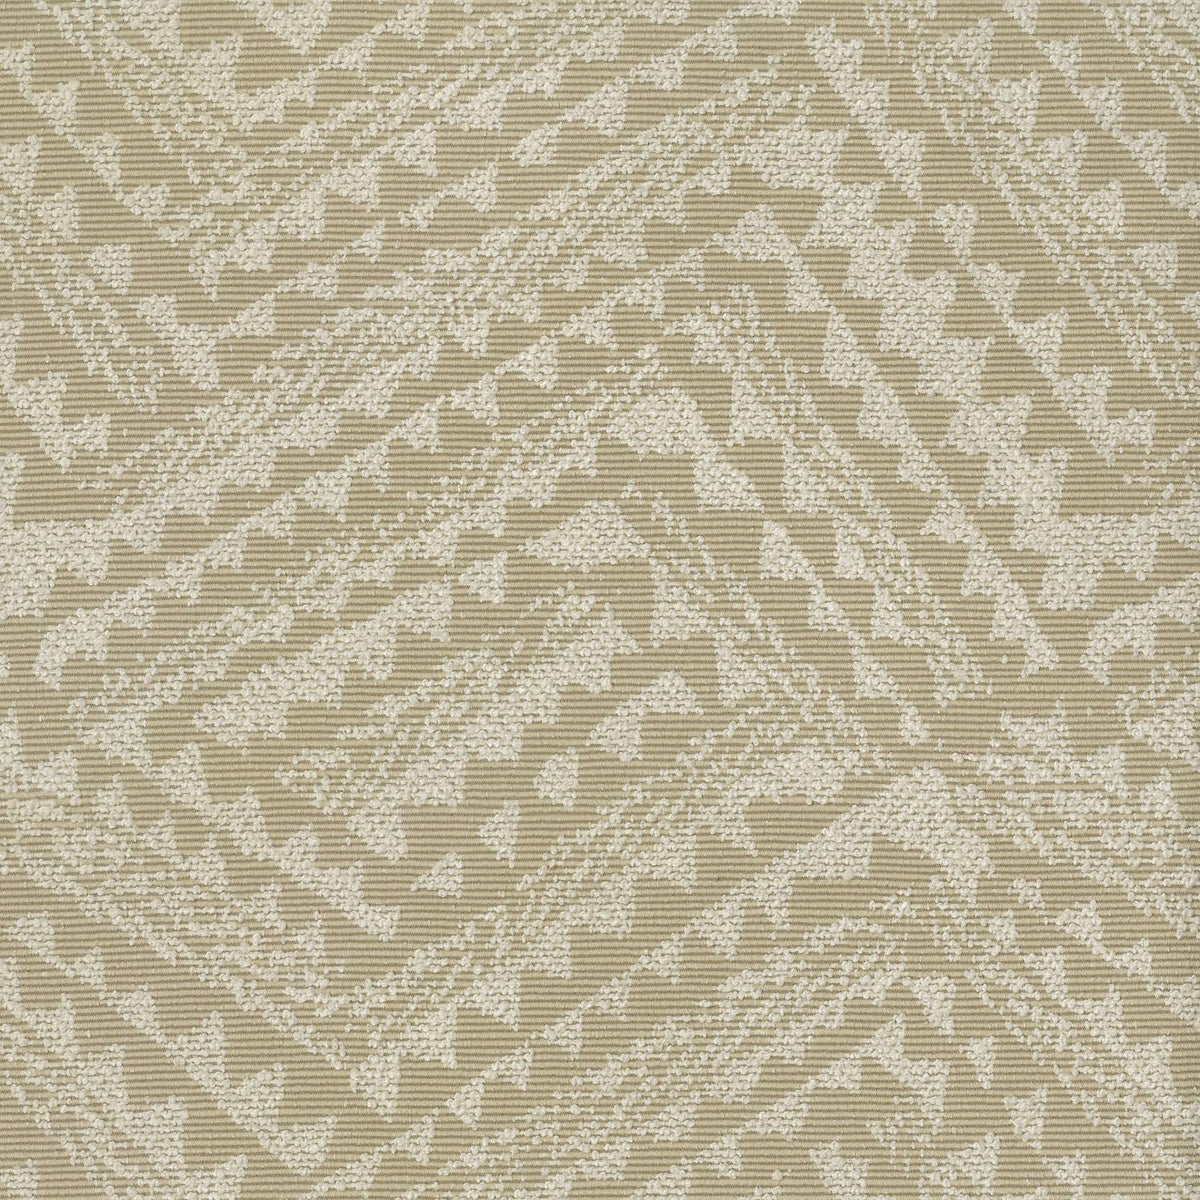 P/K Lifestyles Braided Lines - Linen 410751 Upholstery Fabric